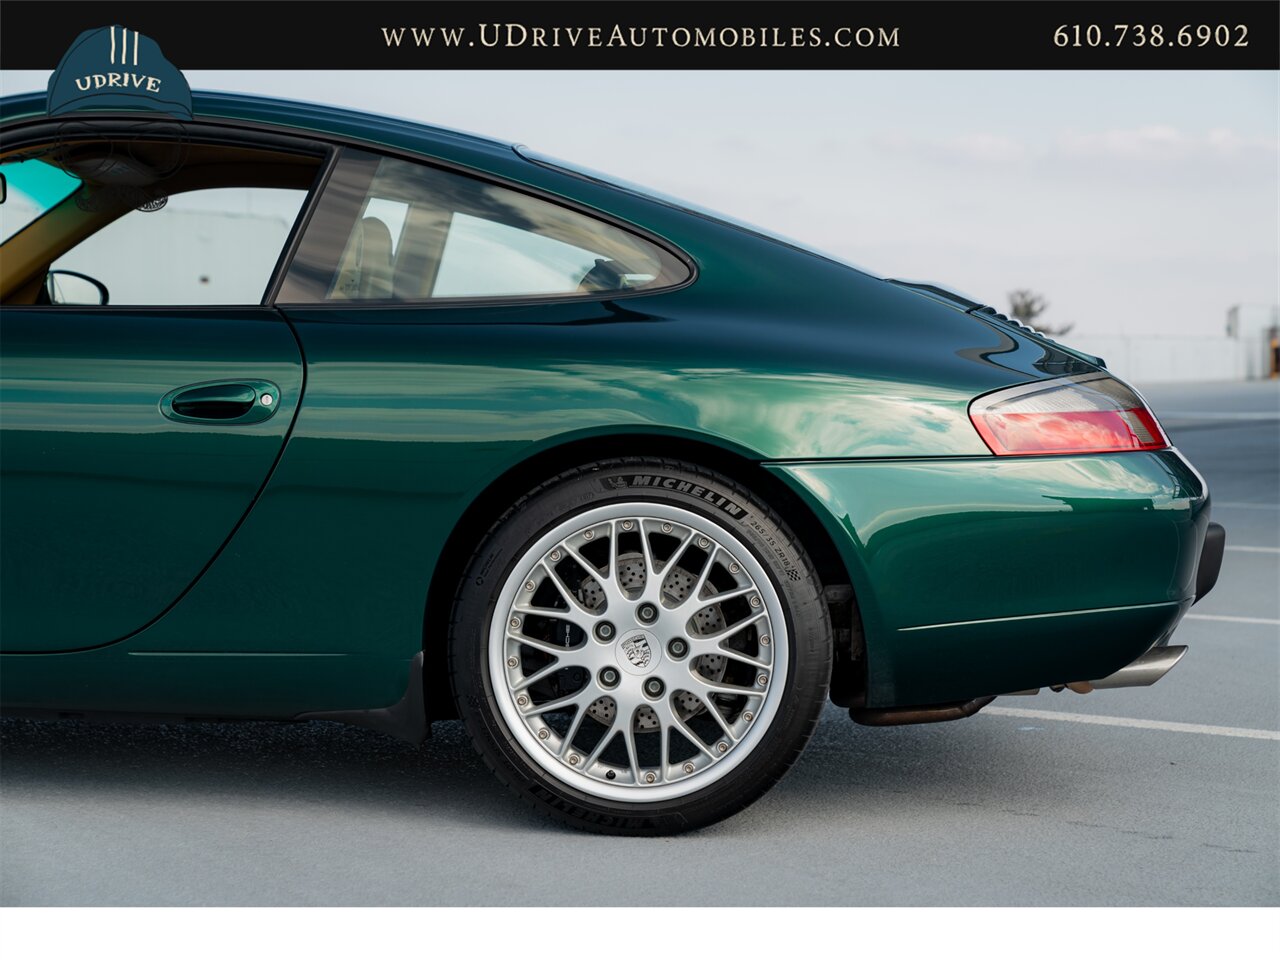 2001 Porsche 911 Carrera 996 Coupe 6 Speed Rare Rain Forest Green  IMS Retrofit Detailed Service History - Photo 23 - West Chester, PA 19382